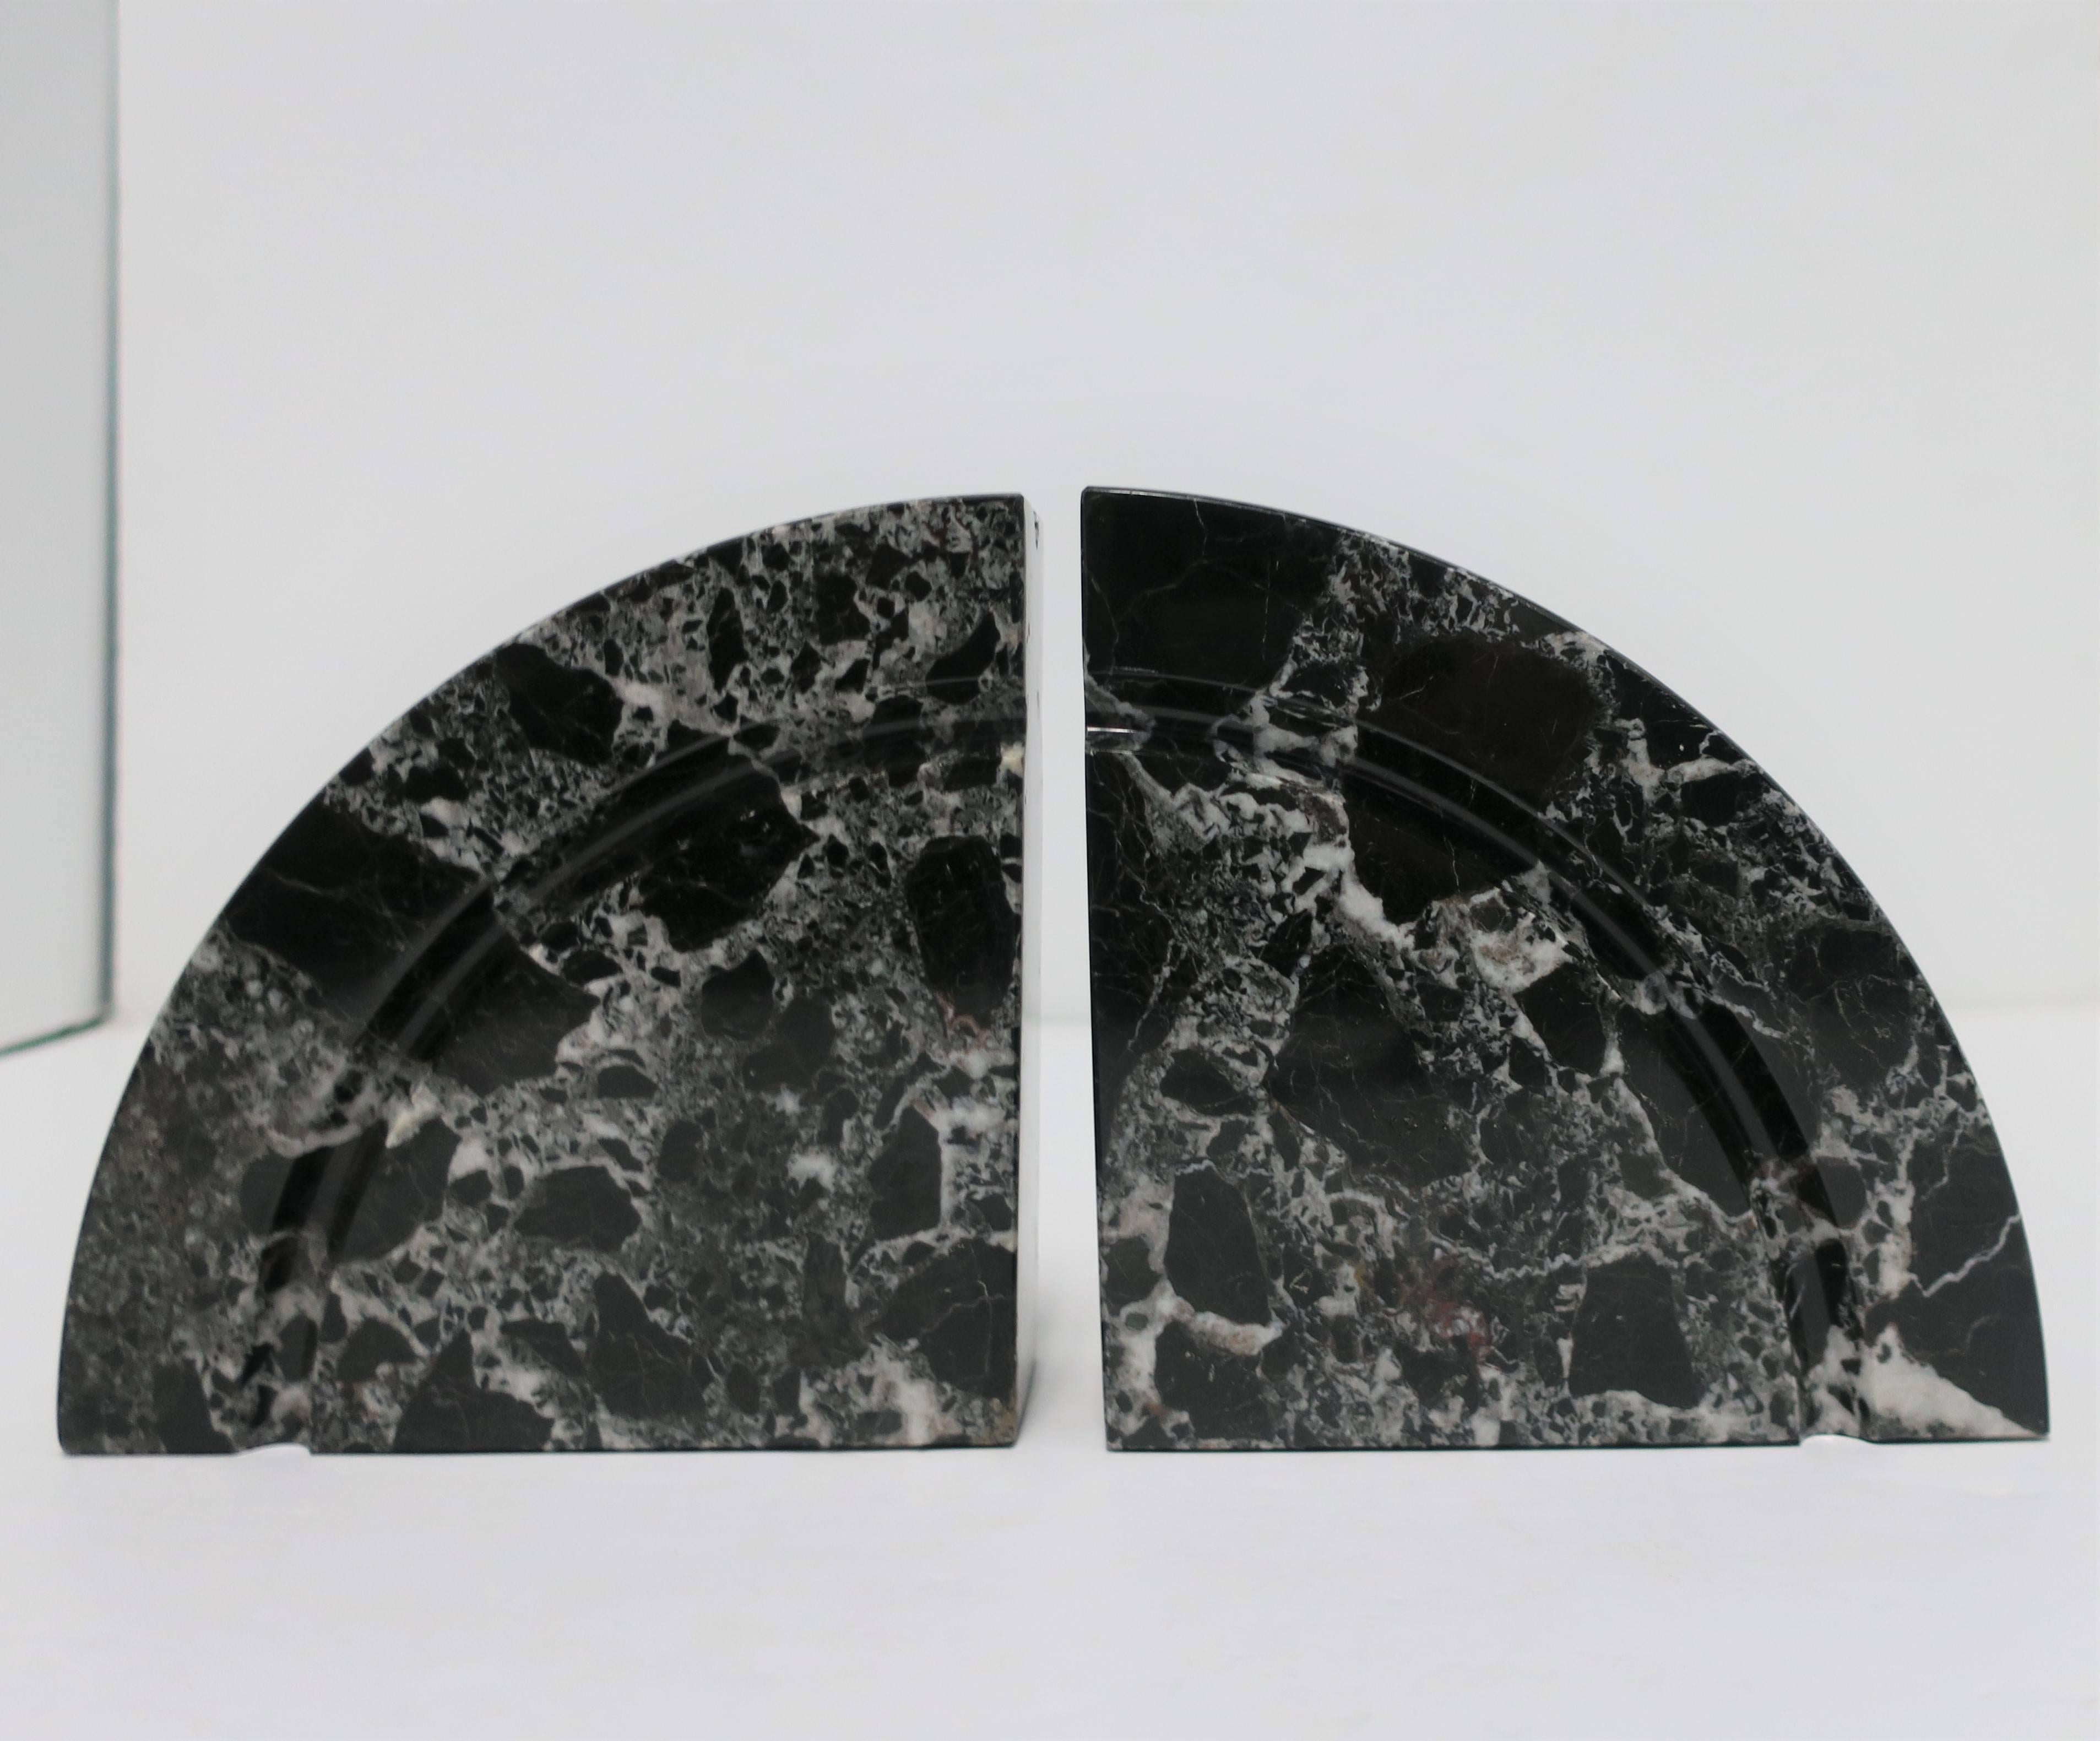 A substantial pair of '70s Modern or Post-Modern period, black and white marble bookends in a half-moon or demi-lune shape, circa late-20th century, 1970s.

Each measure: 6